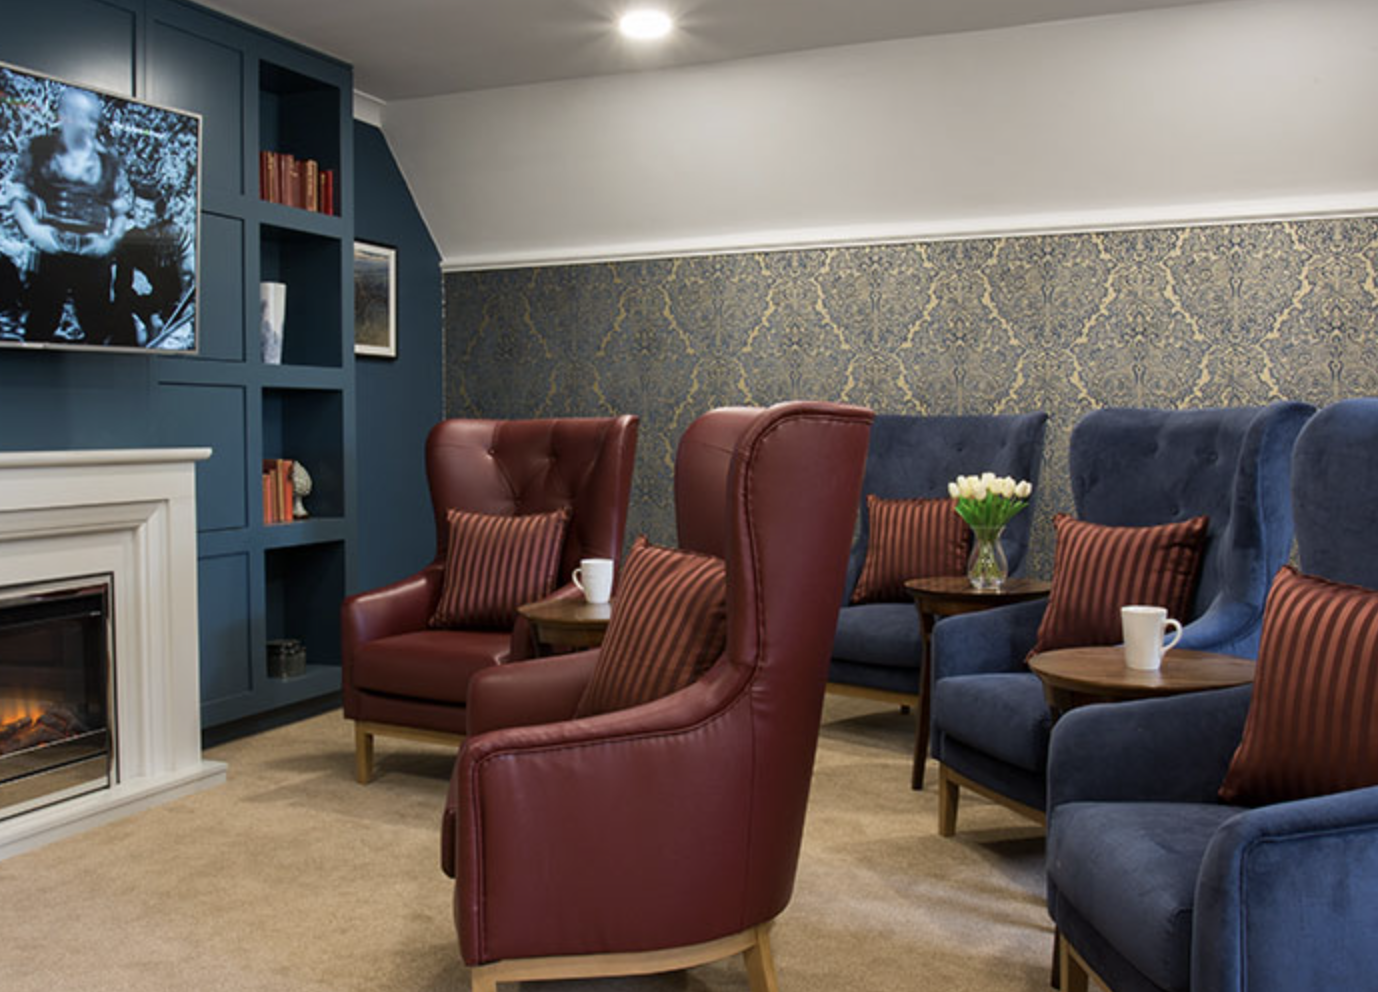 Lounge of Erskine Hall care home in Northwood, London